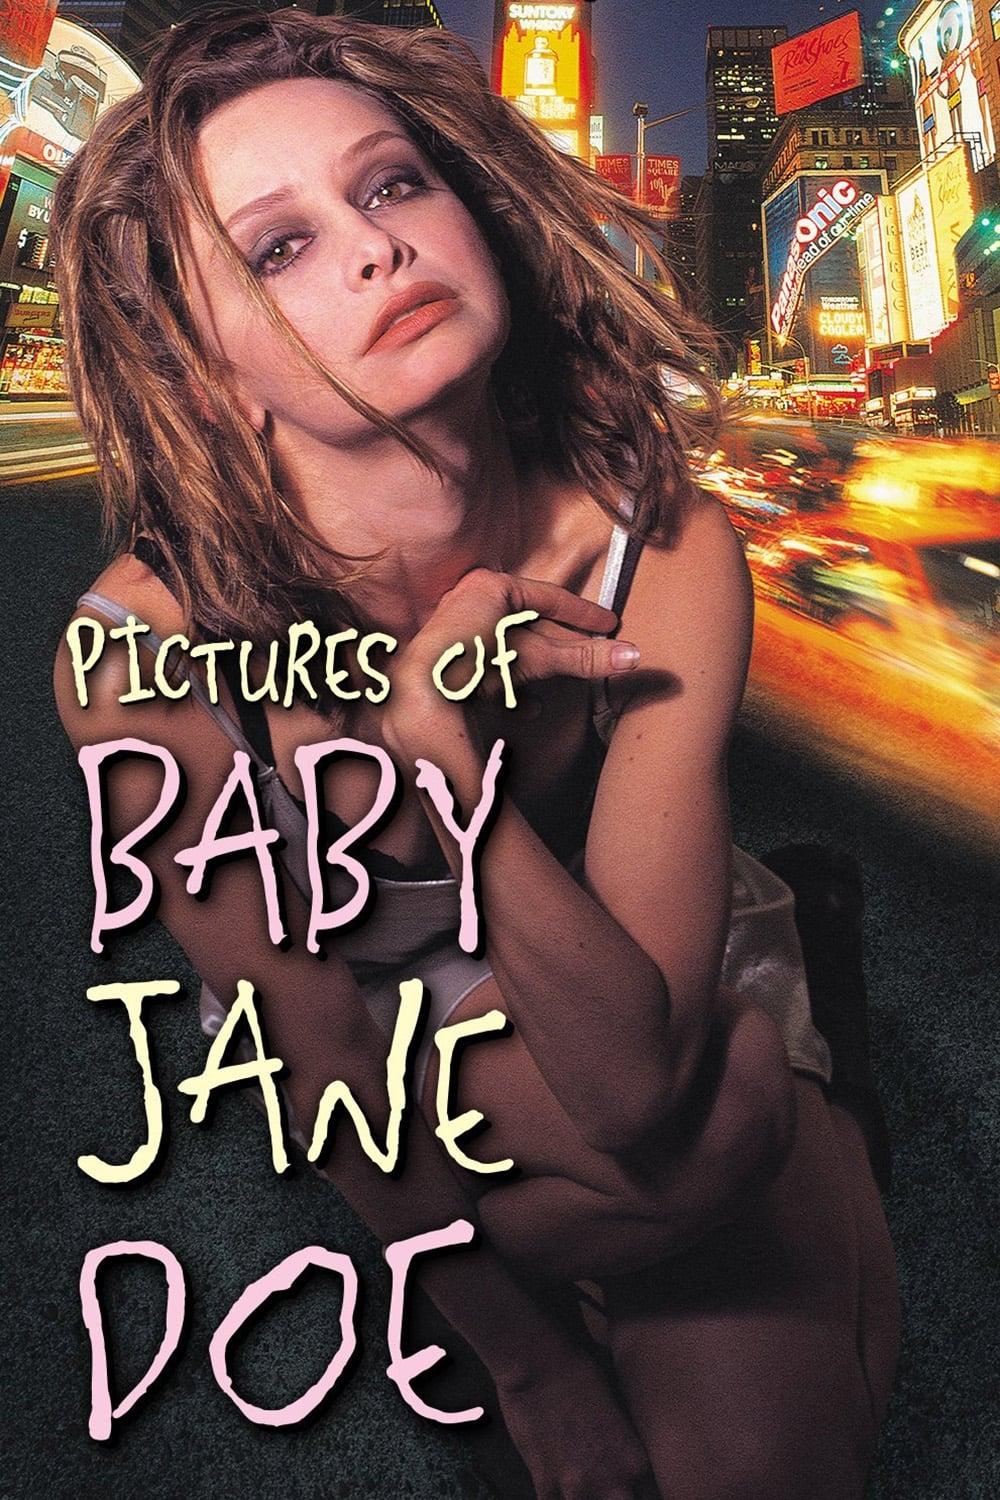 Pictures of Baby Jane Doe poster